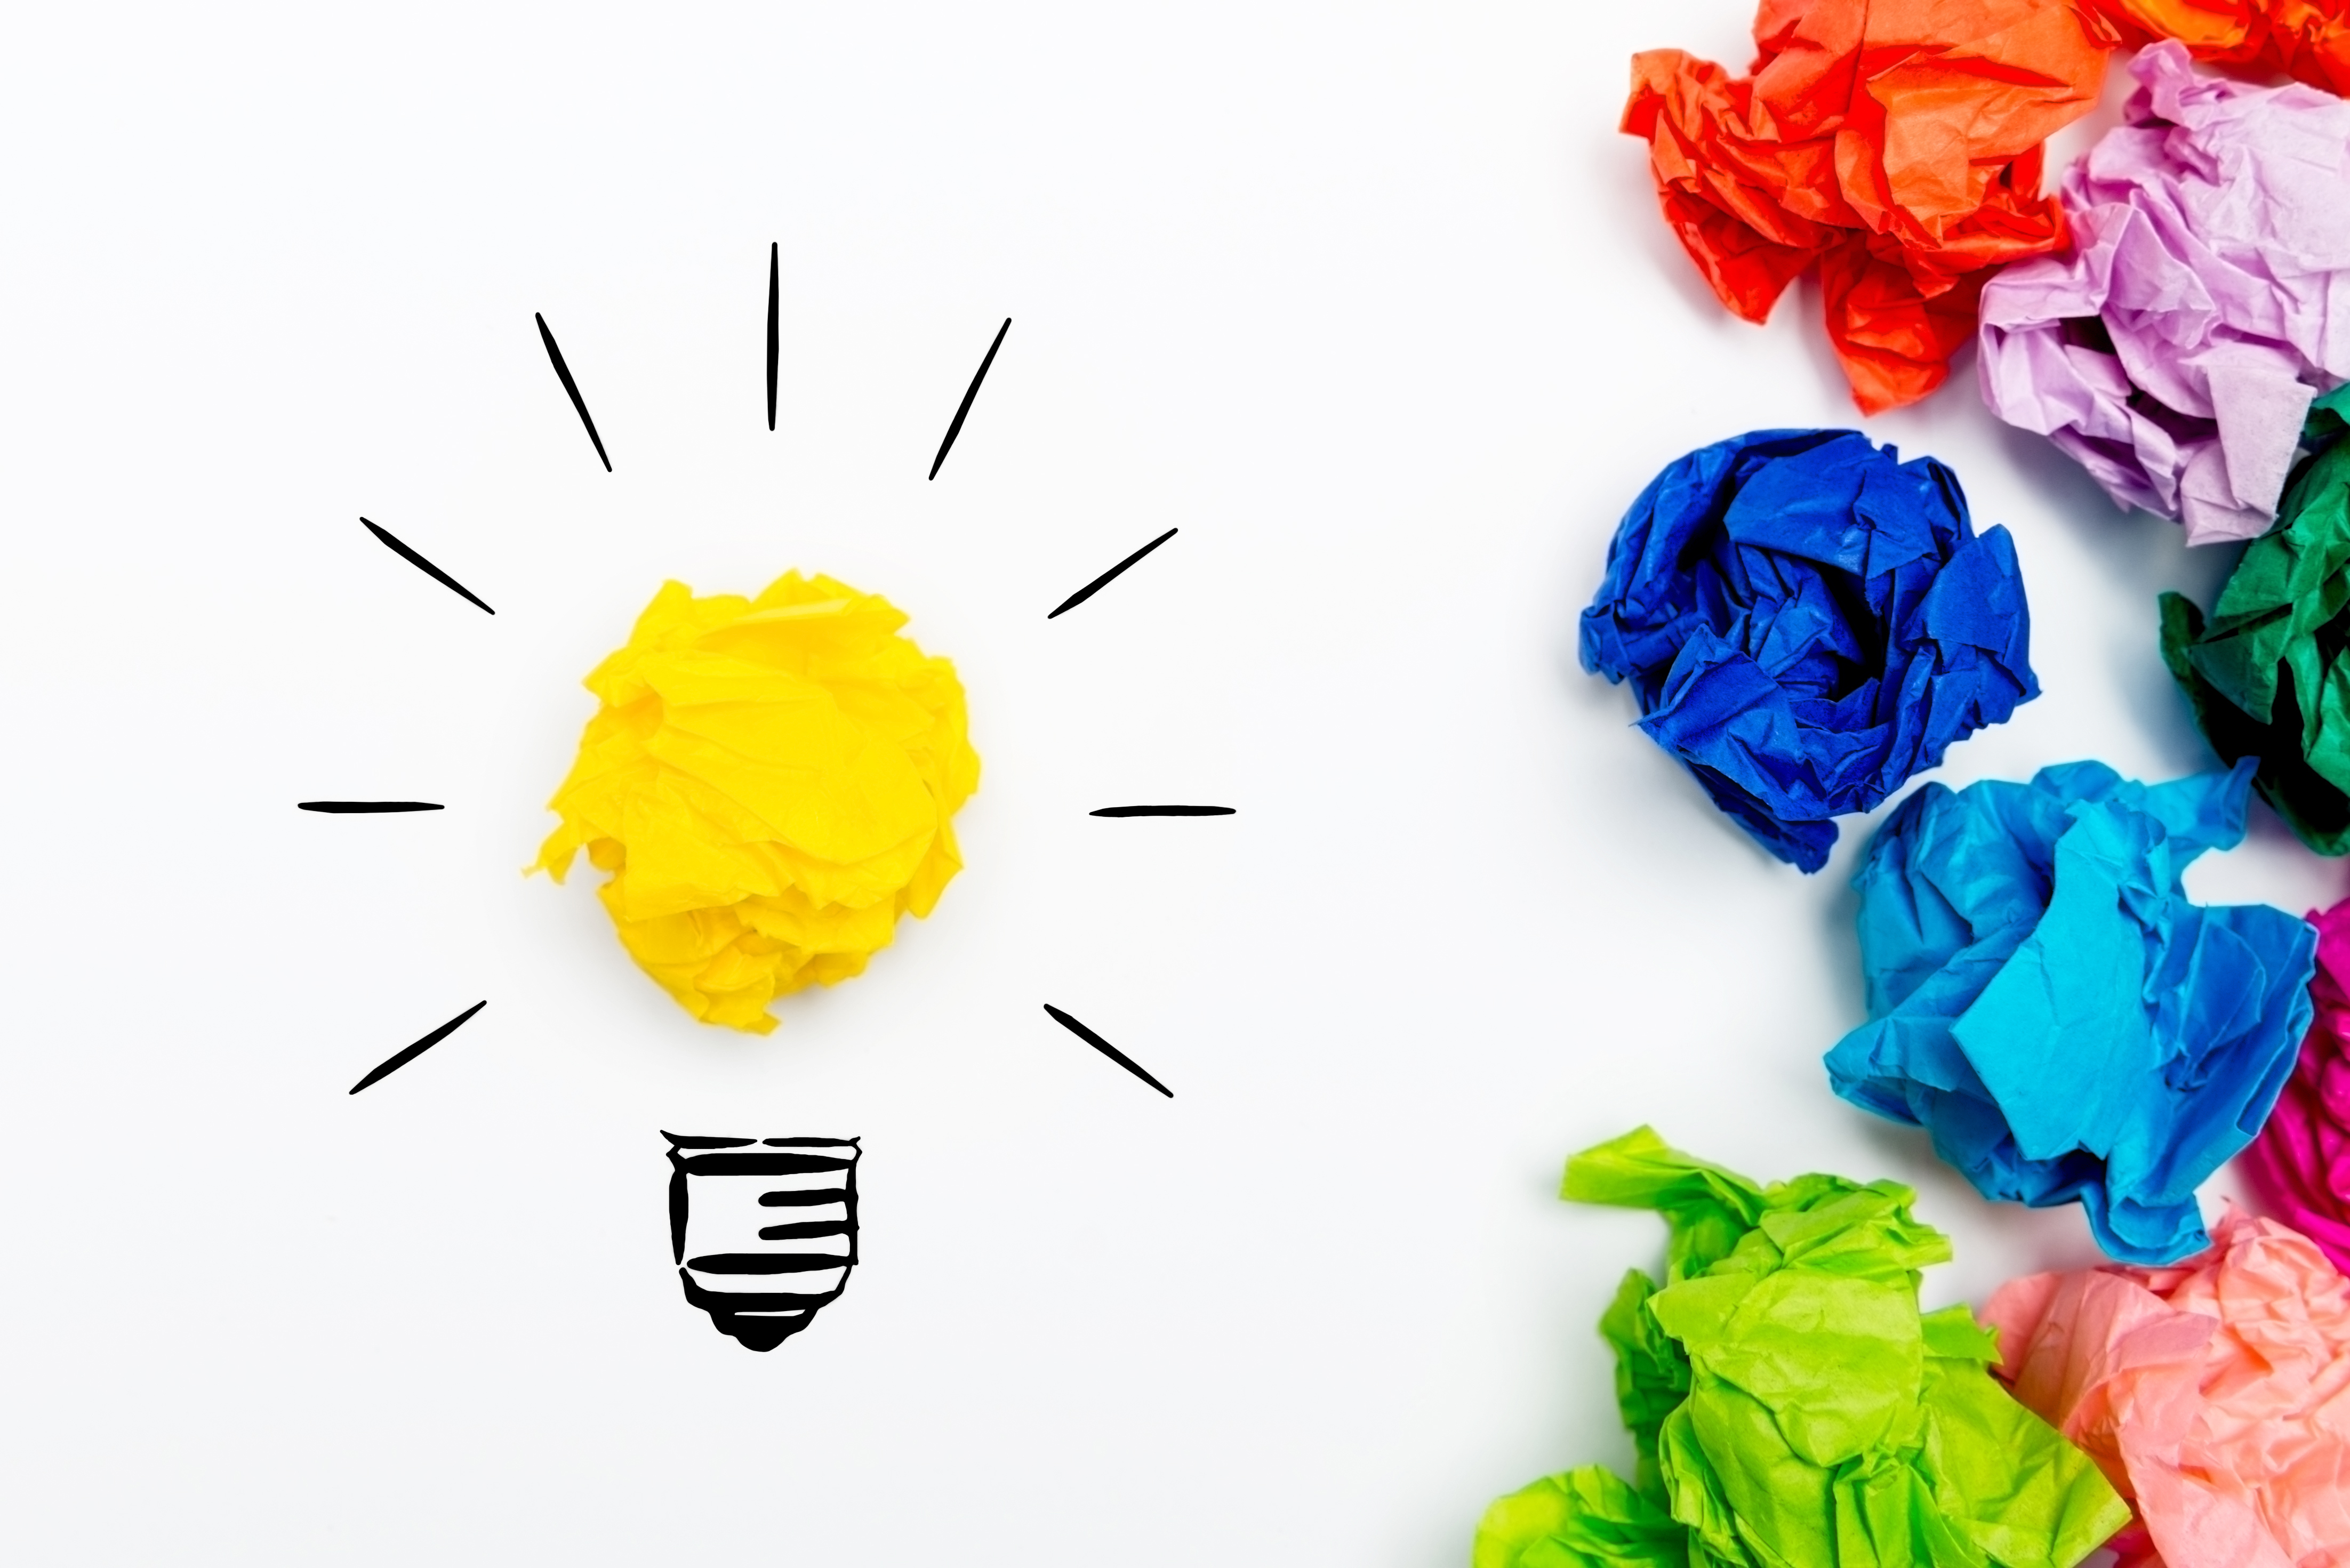 Crumpled paper light bulb over white background, surrounded by crumpled colorful paper. Idea concept.